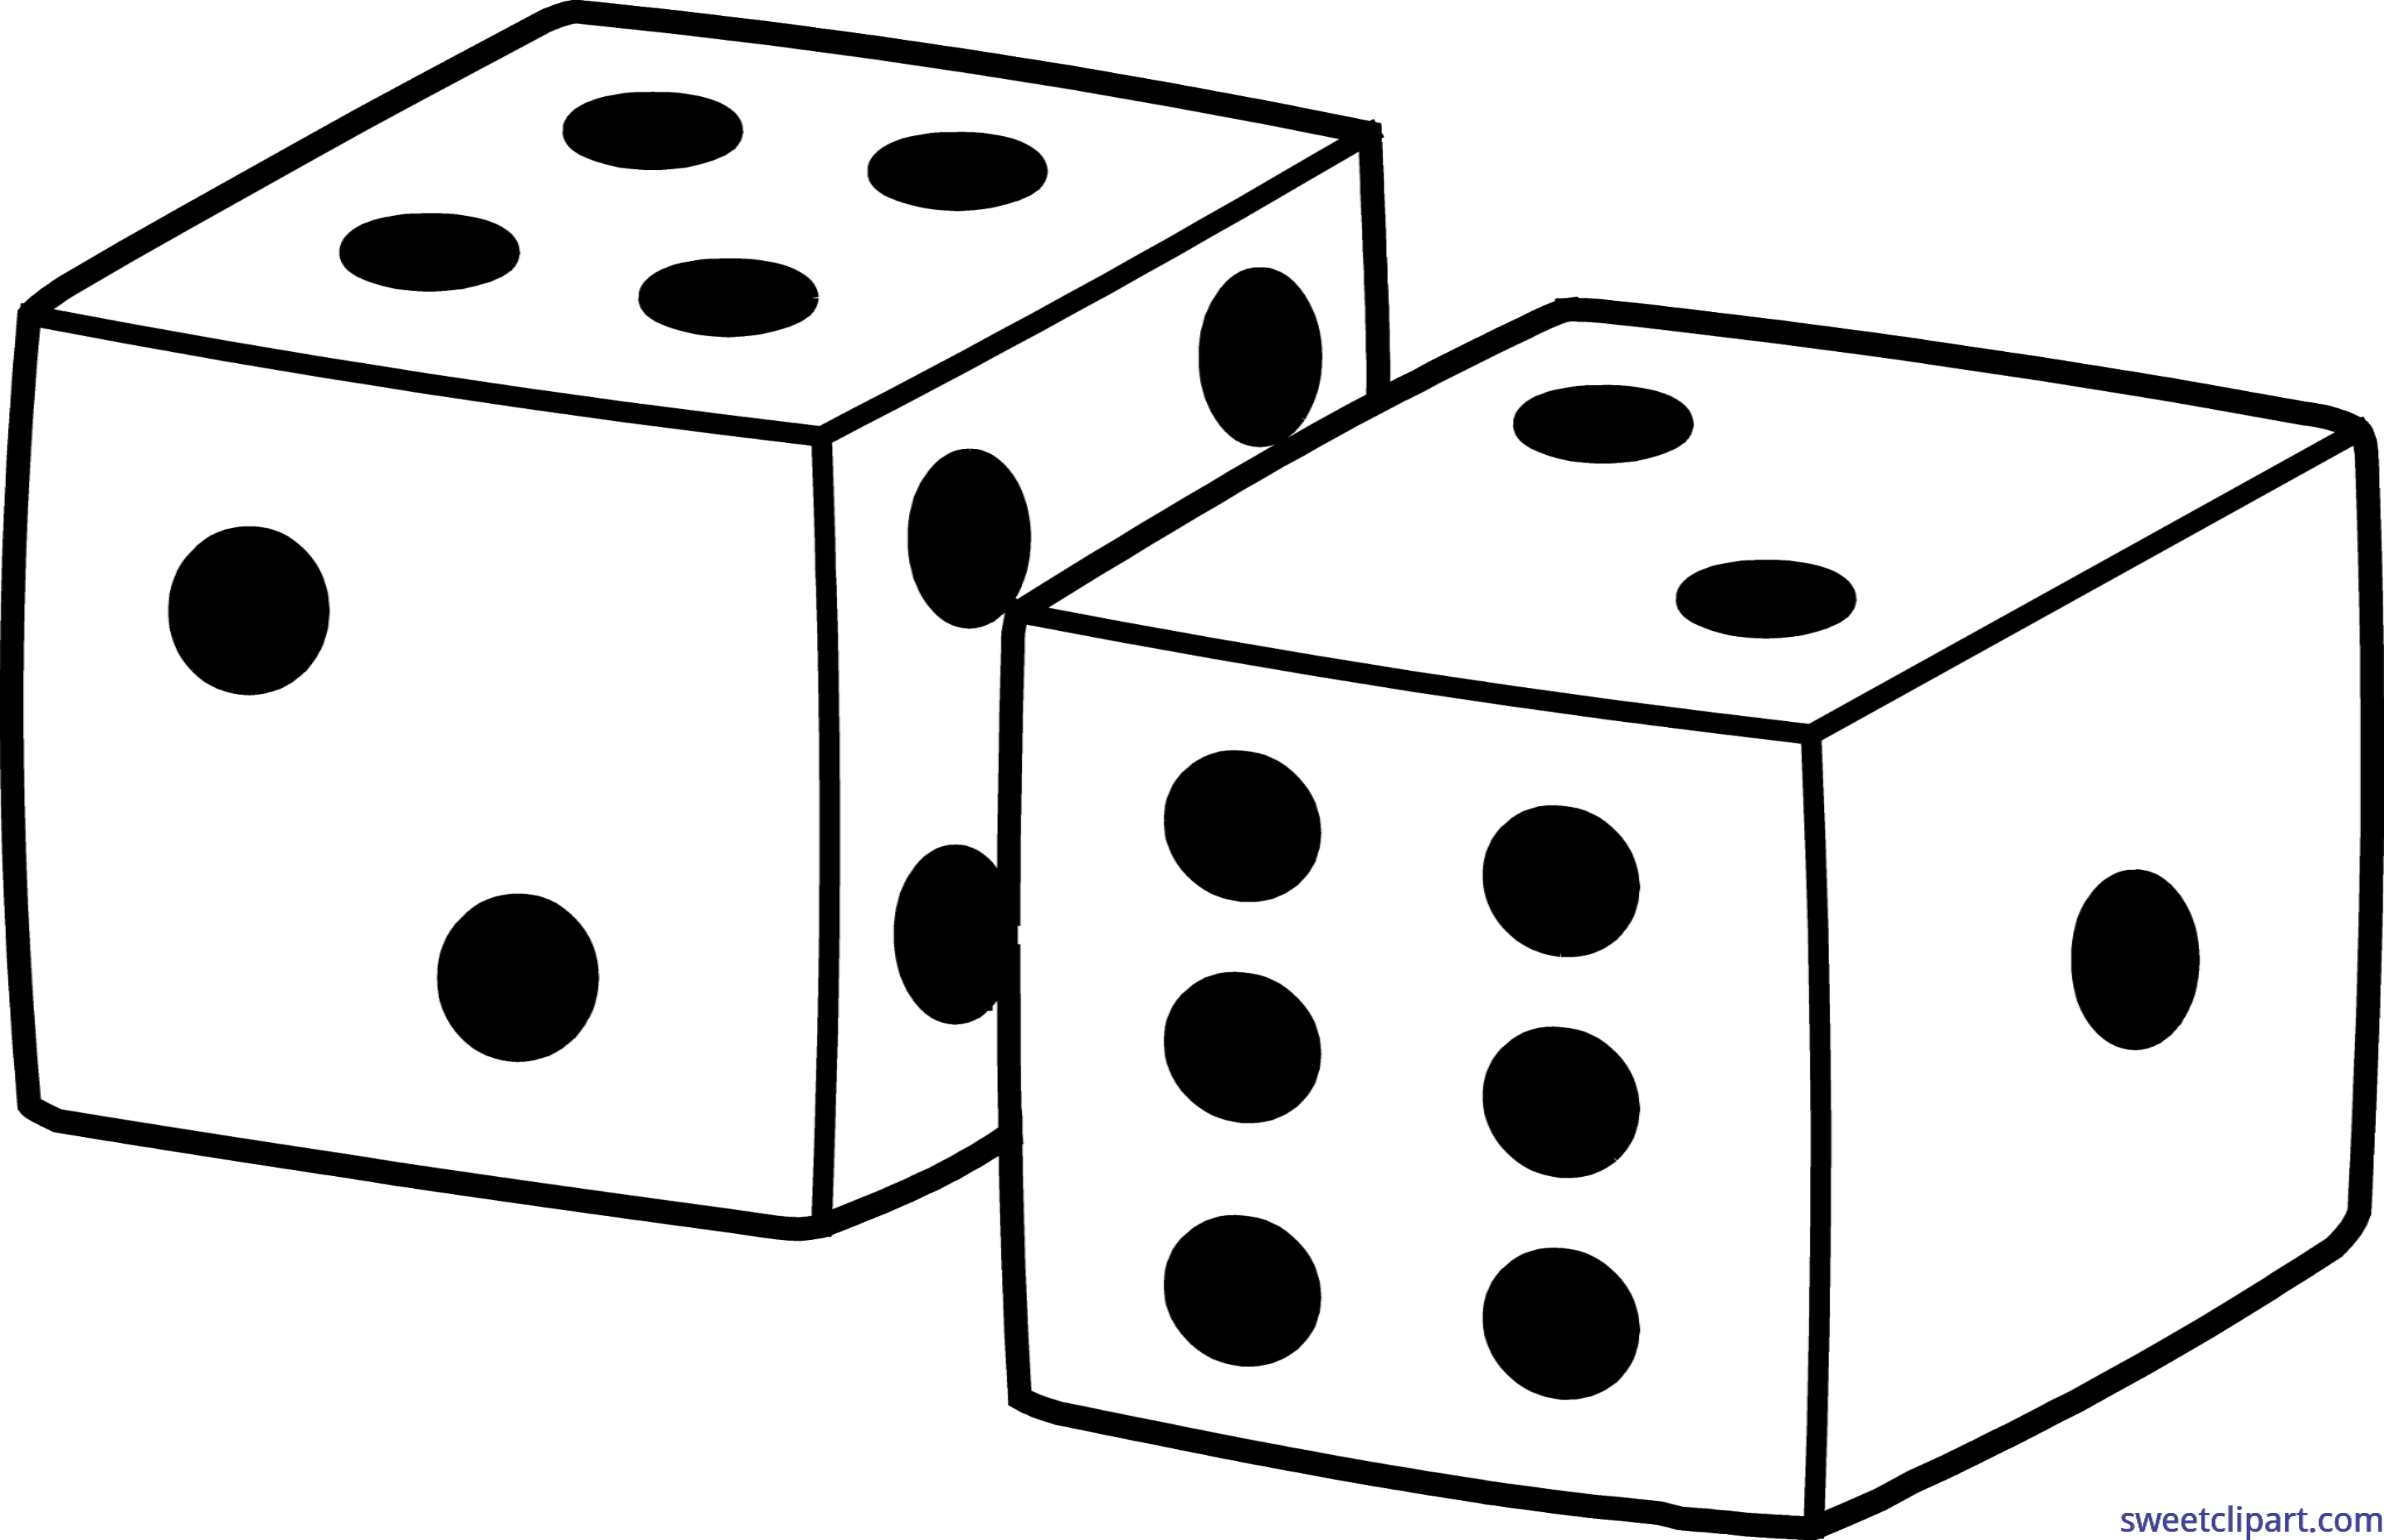 Email clipart simple object. Dice frames illustrations hd